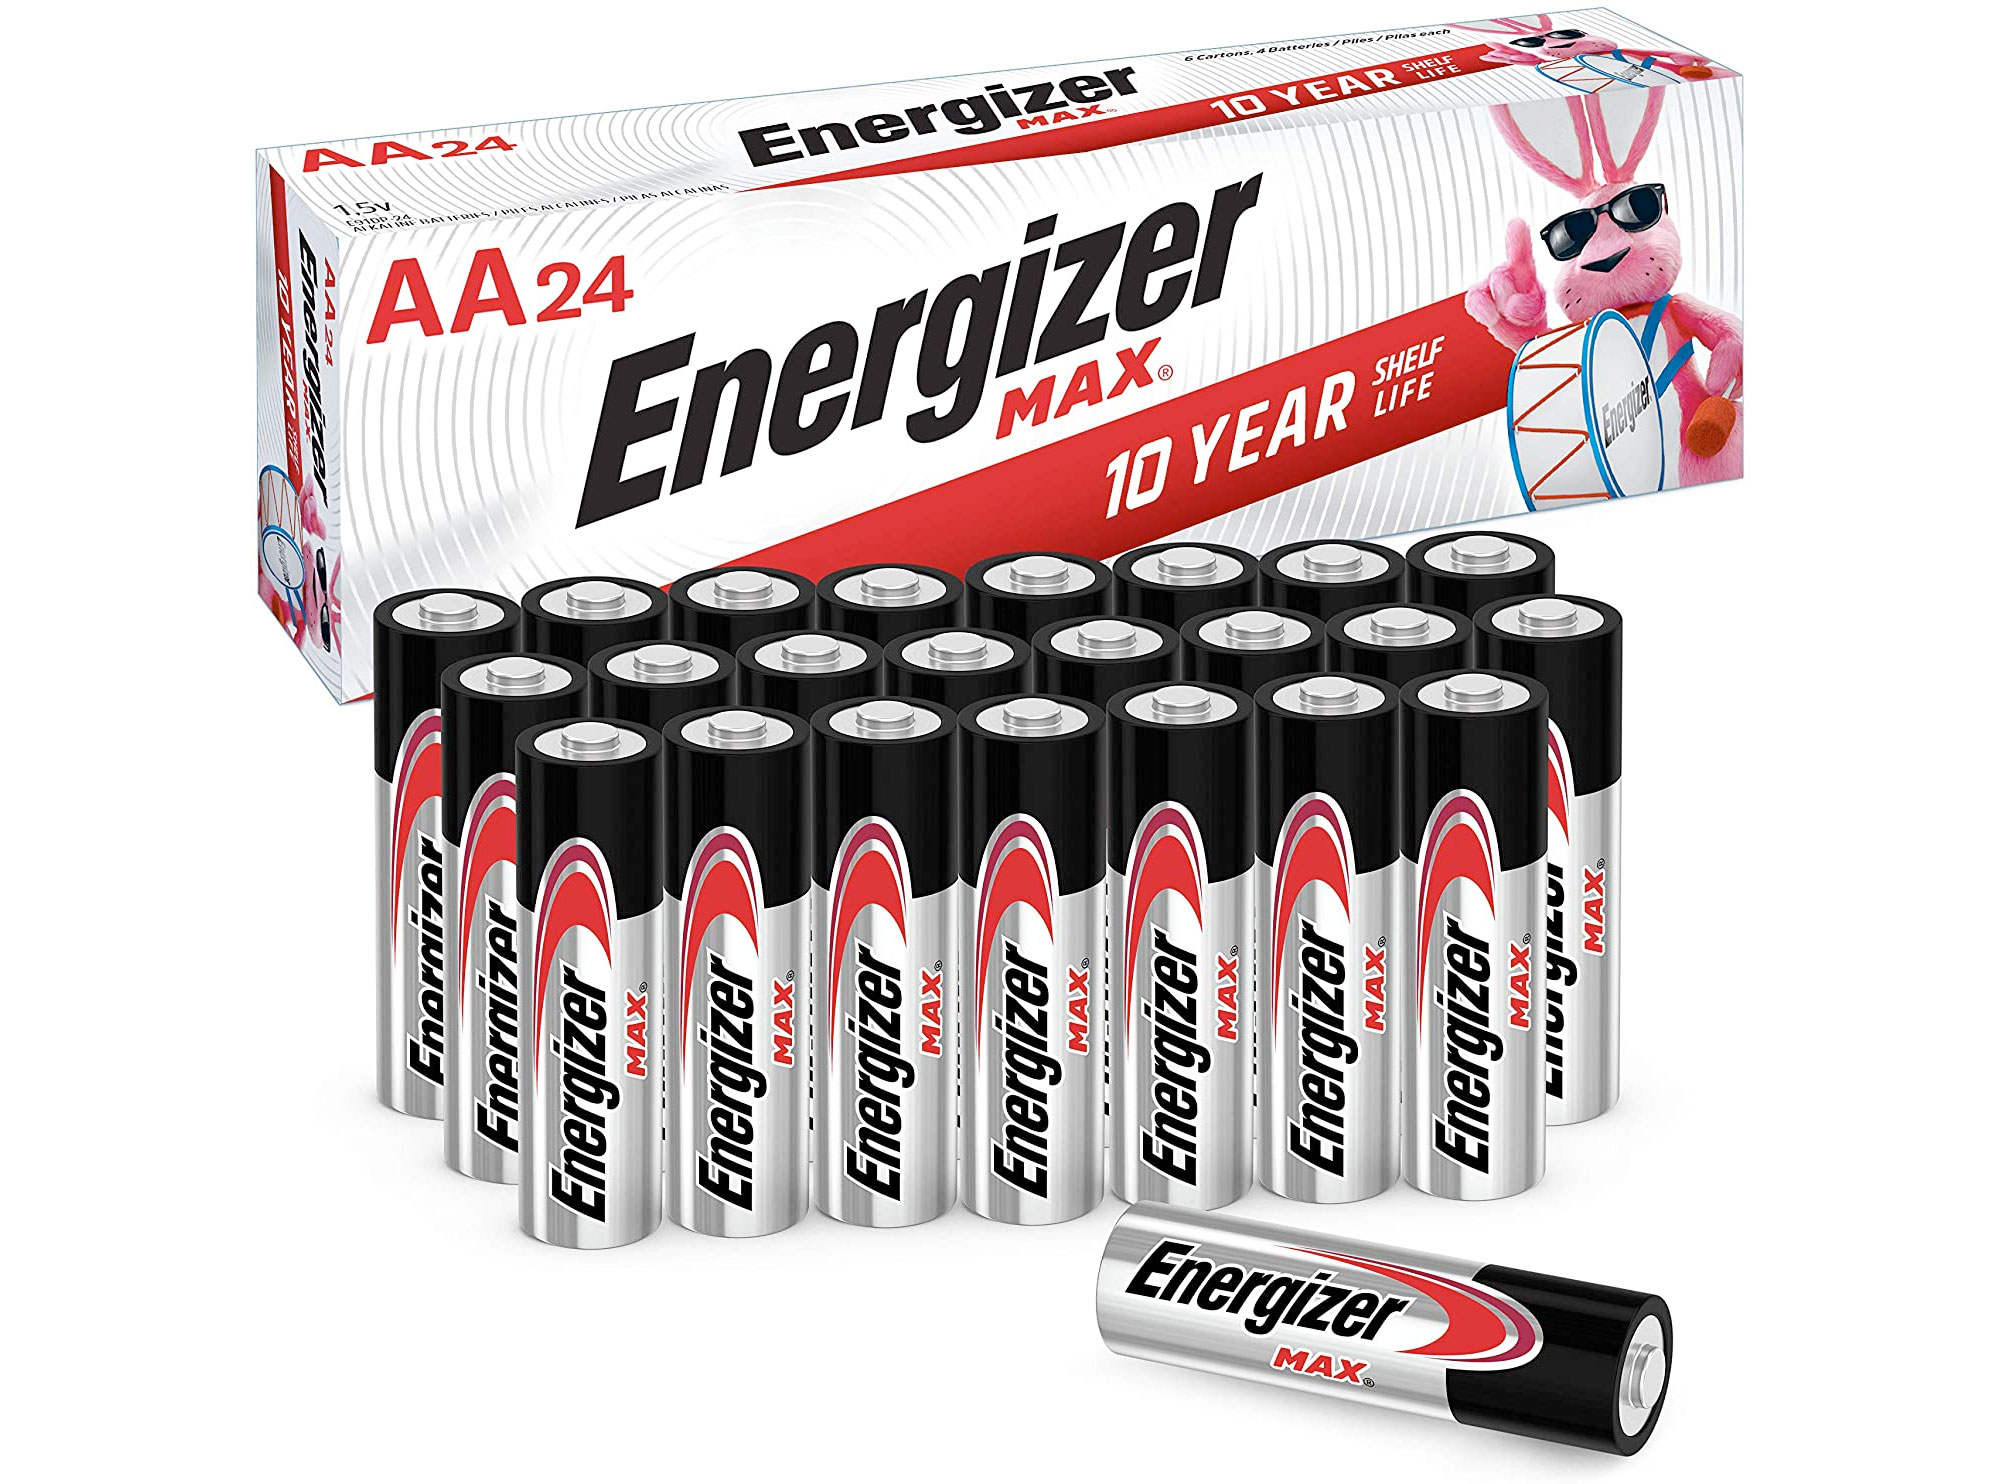 Amazon：Energizer MAX AA Batteries(24-Count)只卖$12.87